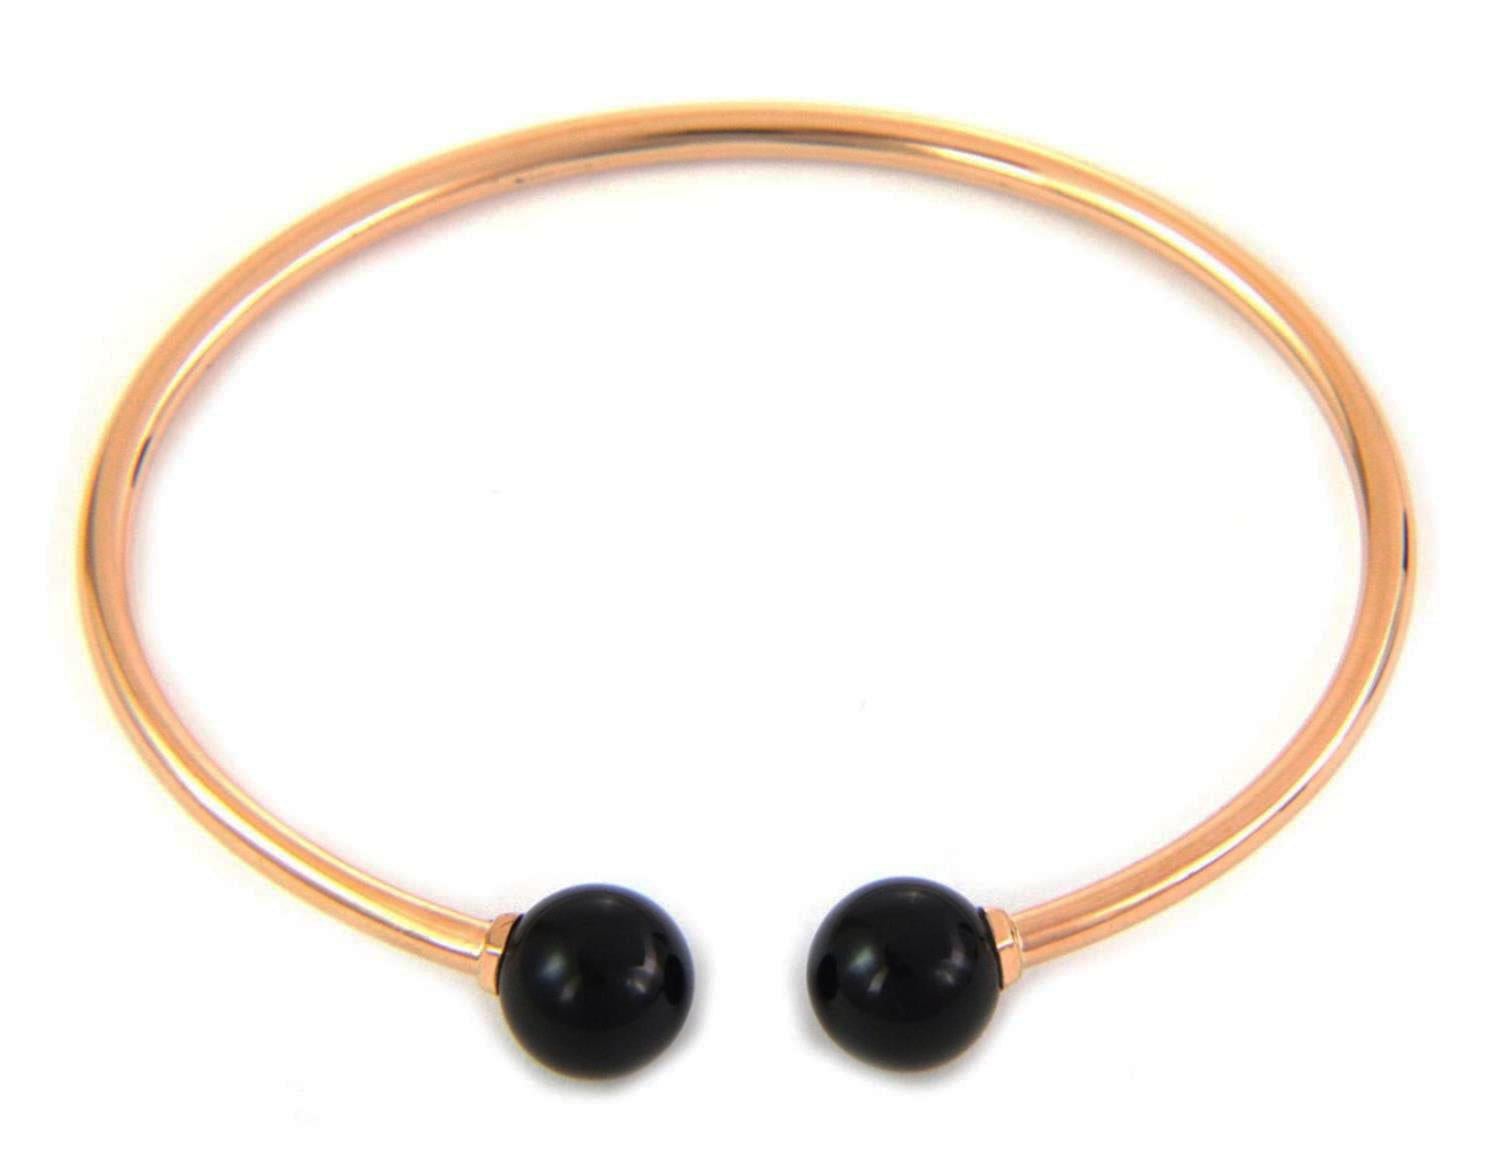 Authentic and elegant from the Tiffany & Co. HardWear collection. This lovely cuff bangle is crafted from 18k rose gold with a 2.5mm thick wire bangle in the cuff style. On each end of the band has an 8mm high polished black onyx bead. The bangle